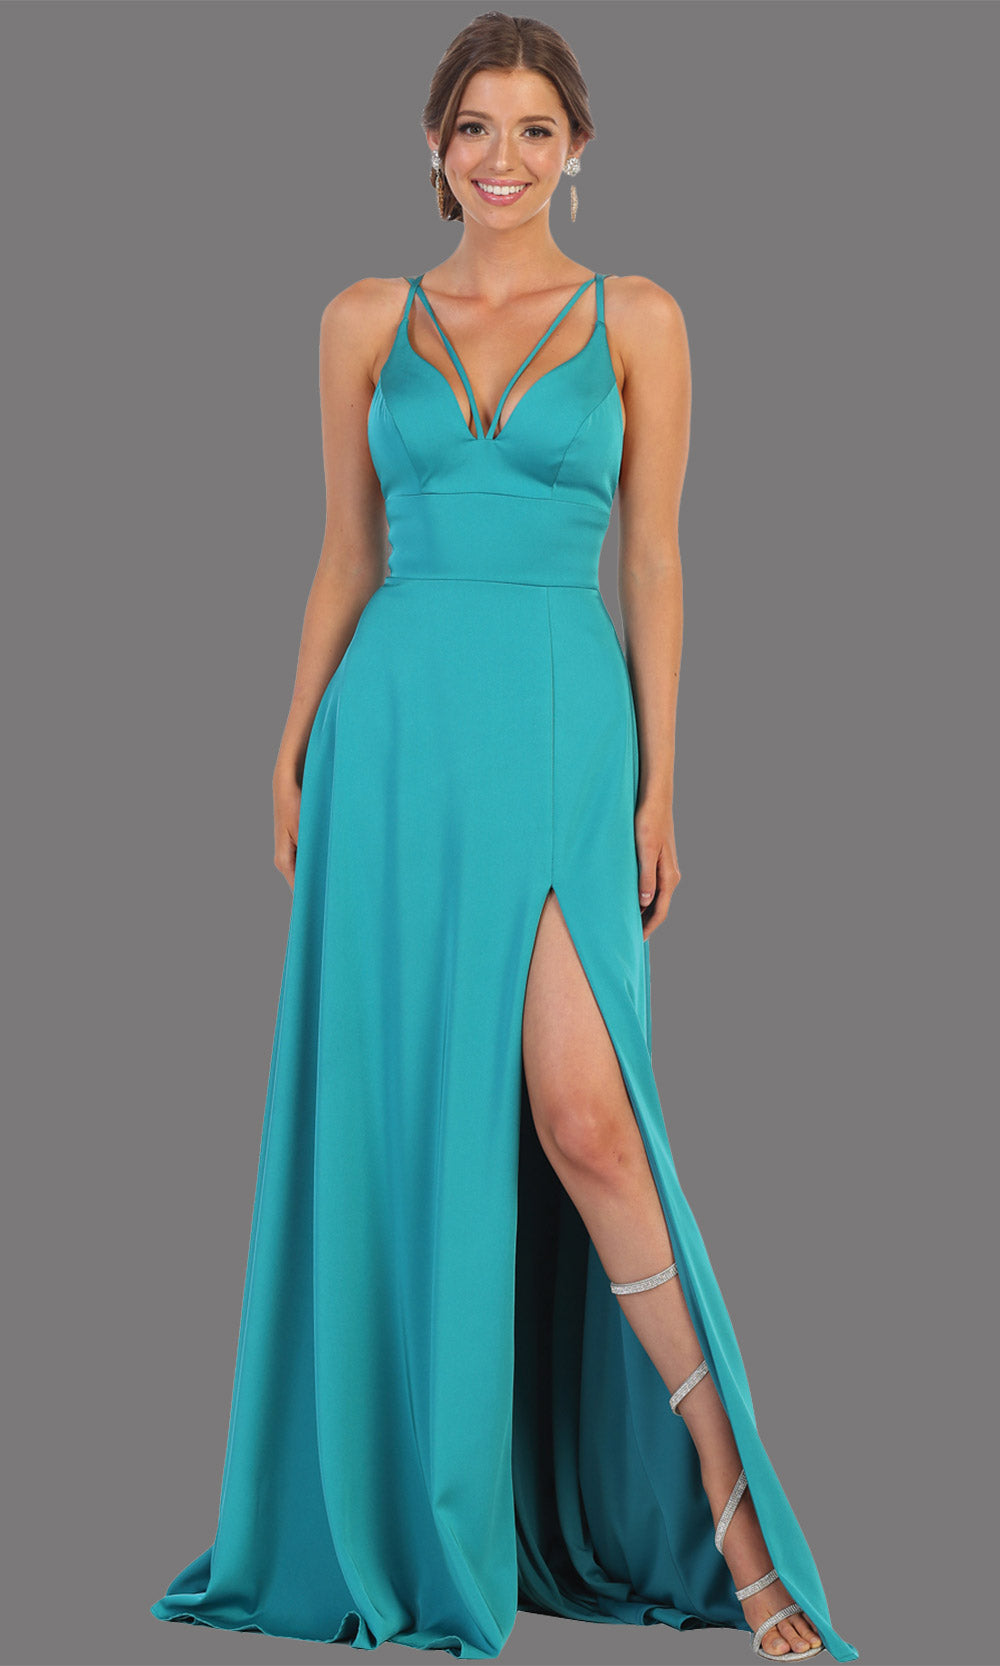 Mayqueen MQ1704 long jade green flowy satin dress with high slit and straps. This green dress is perfect for bridesmaid dresses, simple wedding guest dress, prom dress, gala, black tie wedding. Plus sizes are available, evening party dress